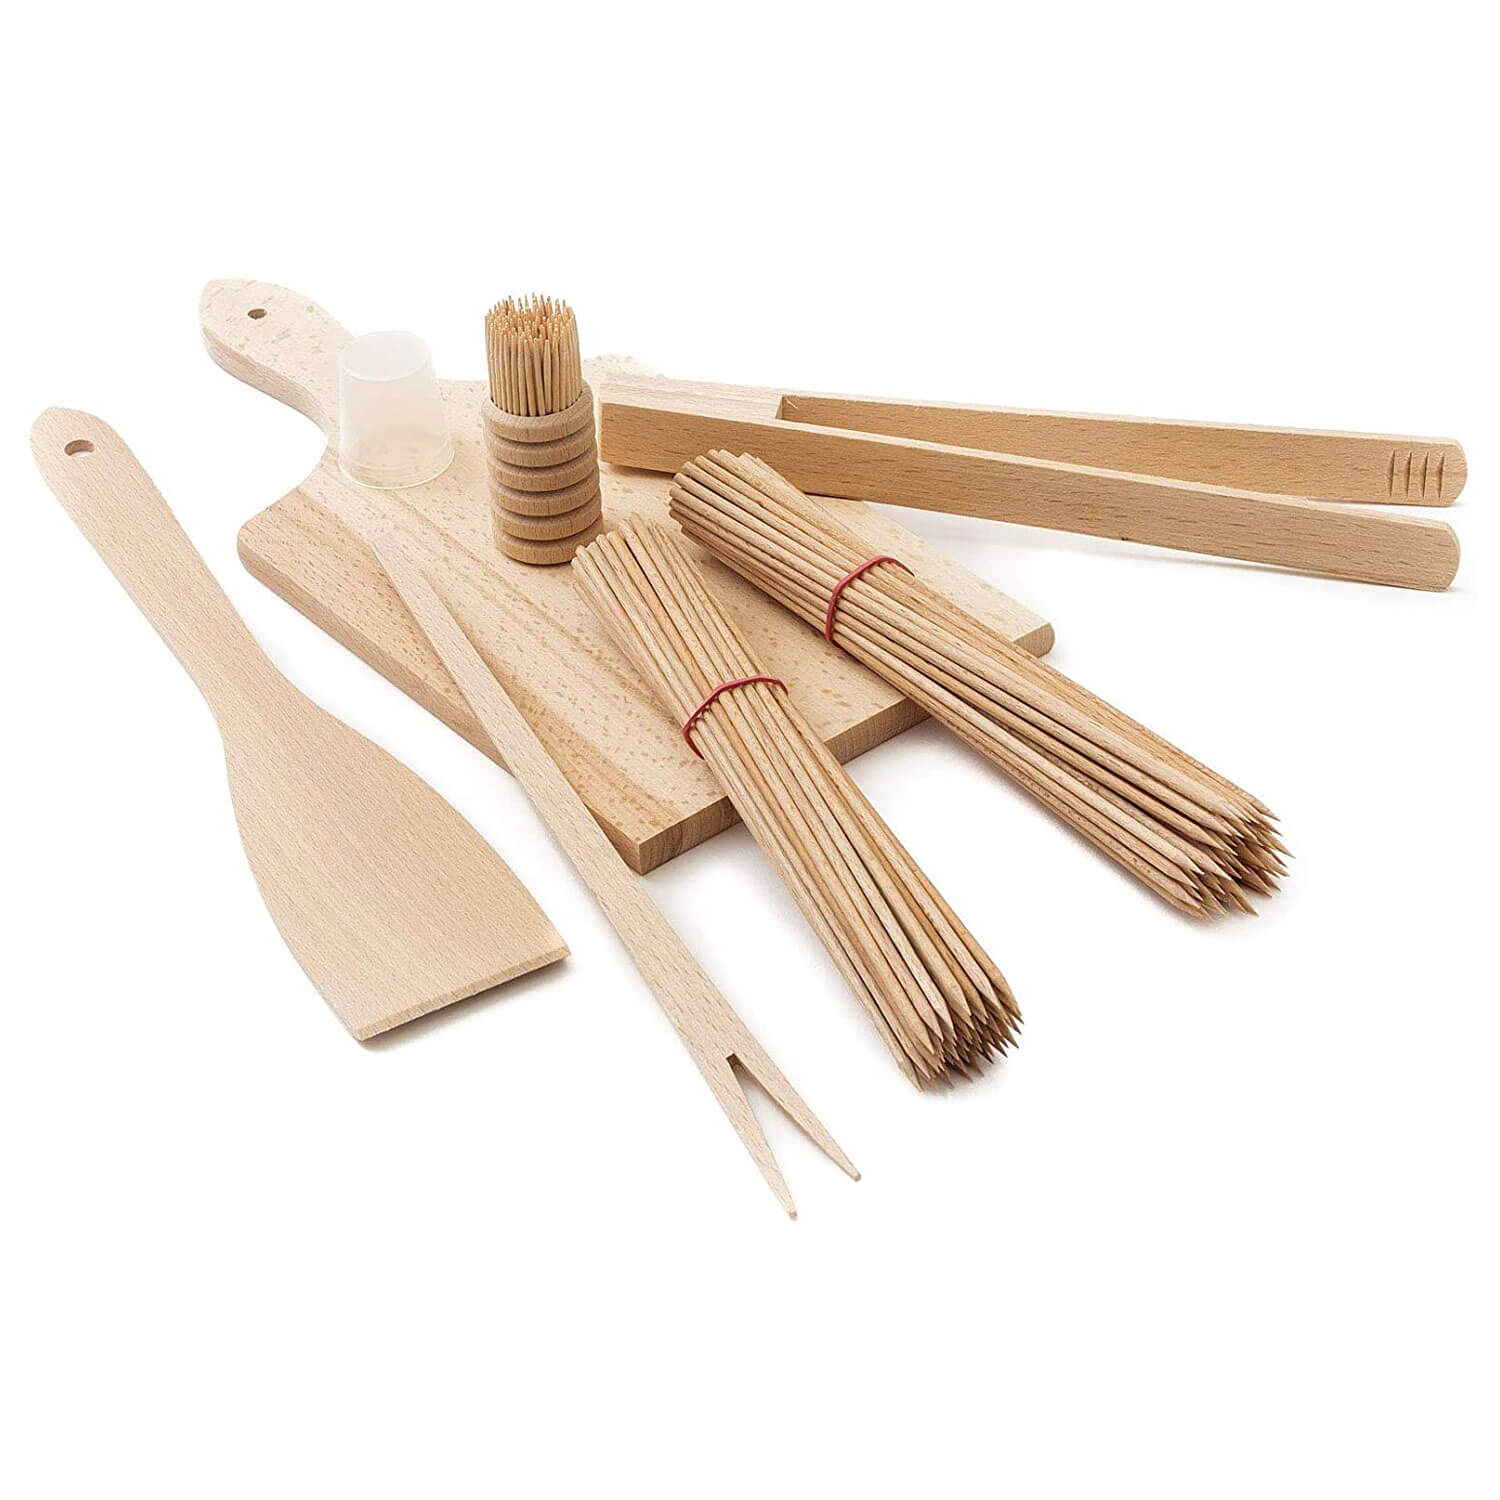 https://cdn.shopify.com/s/files/1/0515/2440/3381/products/wooden-bbq-grill-utensils-set-chopping-board-spatula-tongs-fork-toothpicks-skewers-tuuli-355.jpg